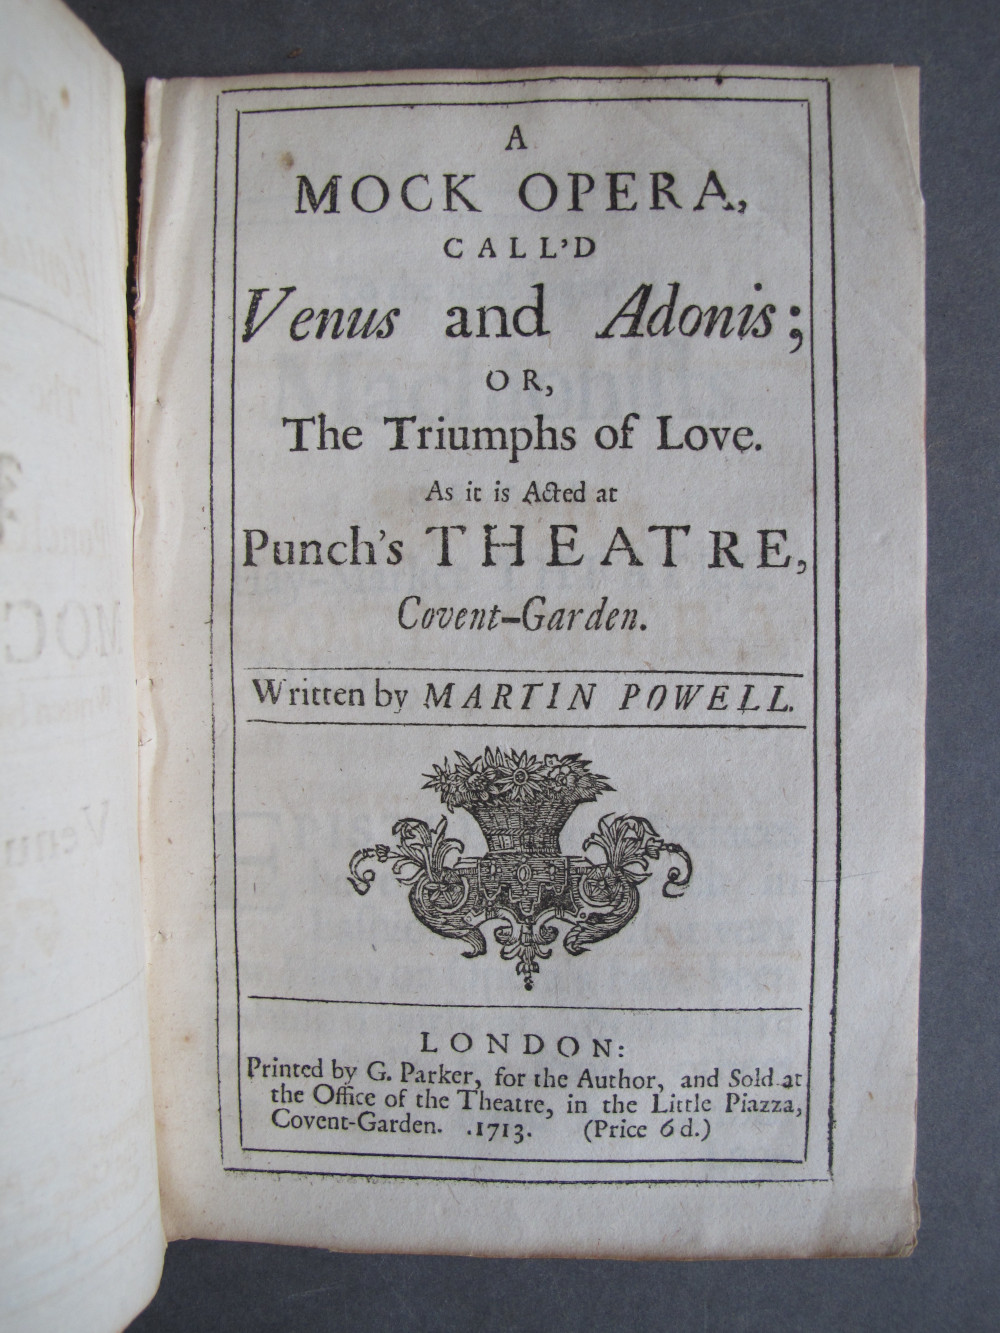 Folio A2 recto, text: 
A
MOCK OPERA,
CALL'D
Venus and Adonis;
OR,
The Triumphs of Love.
As it is Acted at
Punch's THEATRE,
Covent-Garden.

Written by MARTIN POWELL.

LONDON:
Printed by G. Parker, for the Author, and Sold at
the Office of the Theatre, in the Little Piazza,
Covent-Garden. .1713. (Price 6d.)

